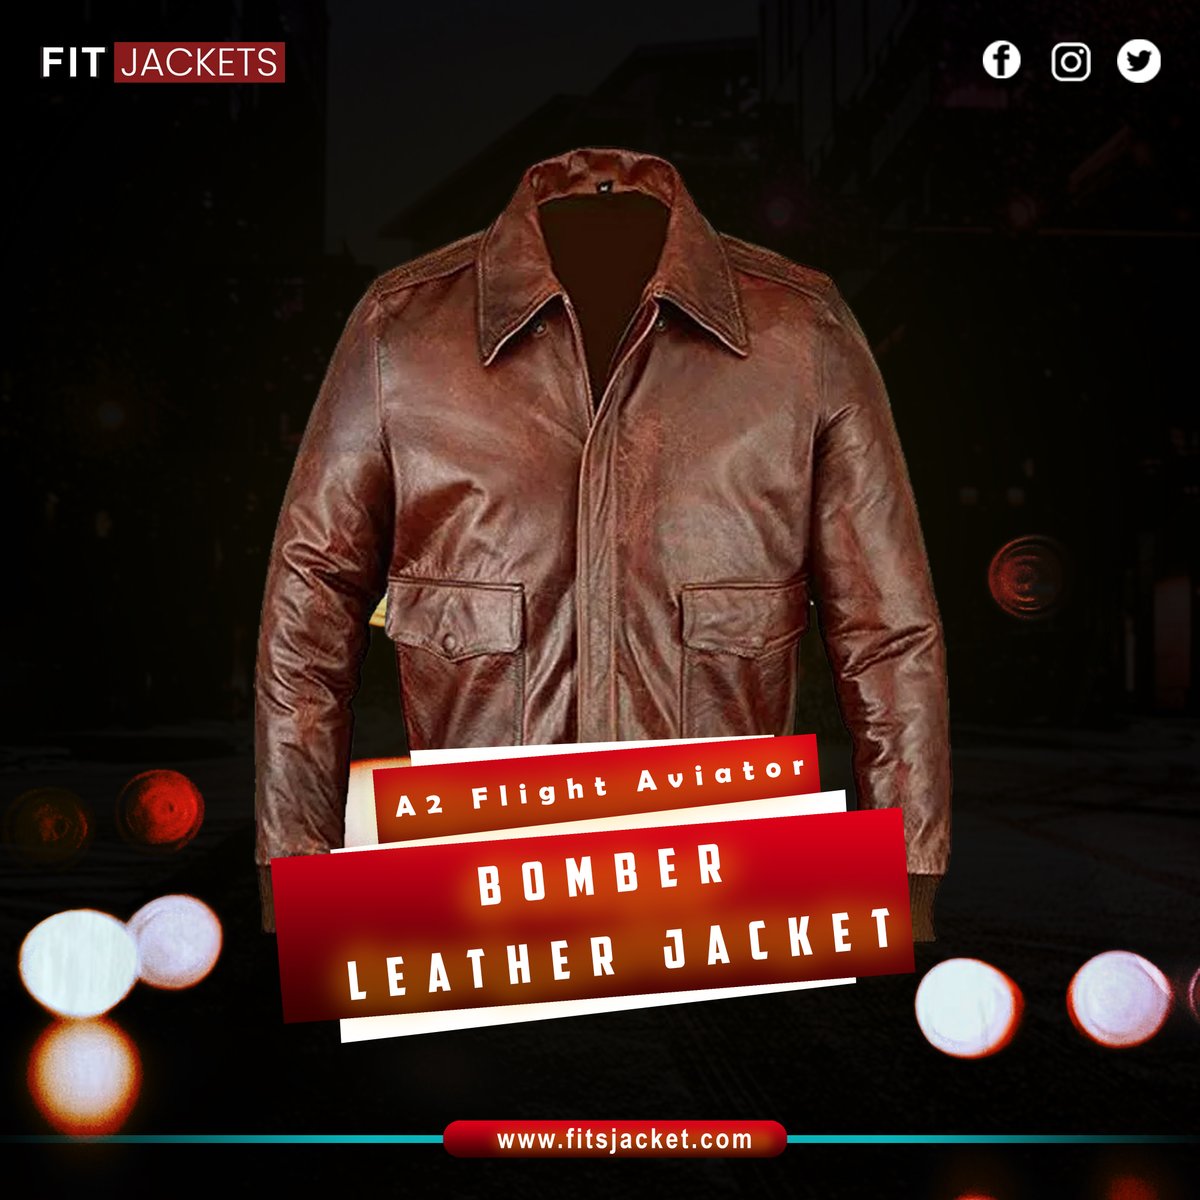 A2 leather flight jacket is now available at fitjackets.com 
Shop now: ➡️ tinyurl.com/2hy5yb84
#winterfashion #vintagestyle #leather #jacket